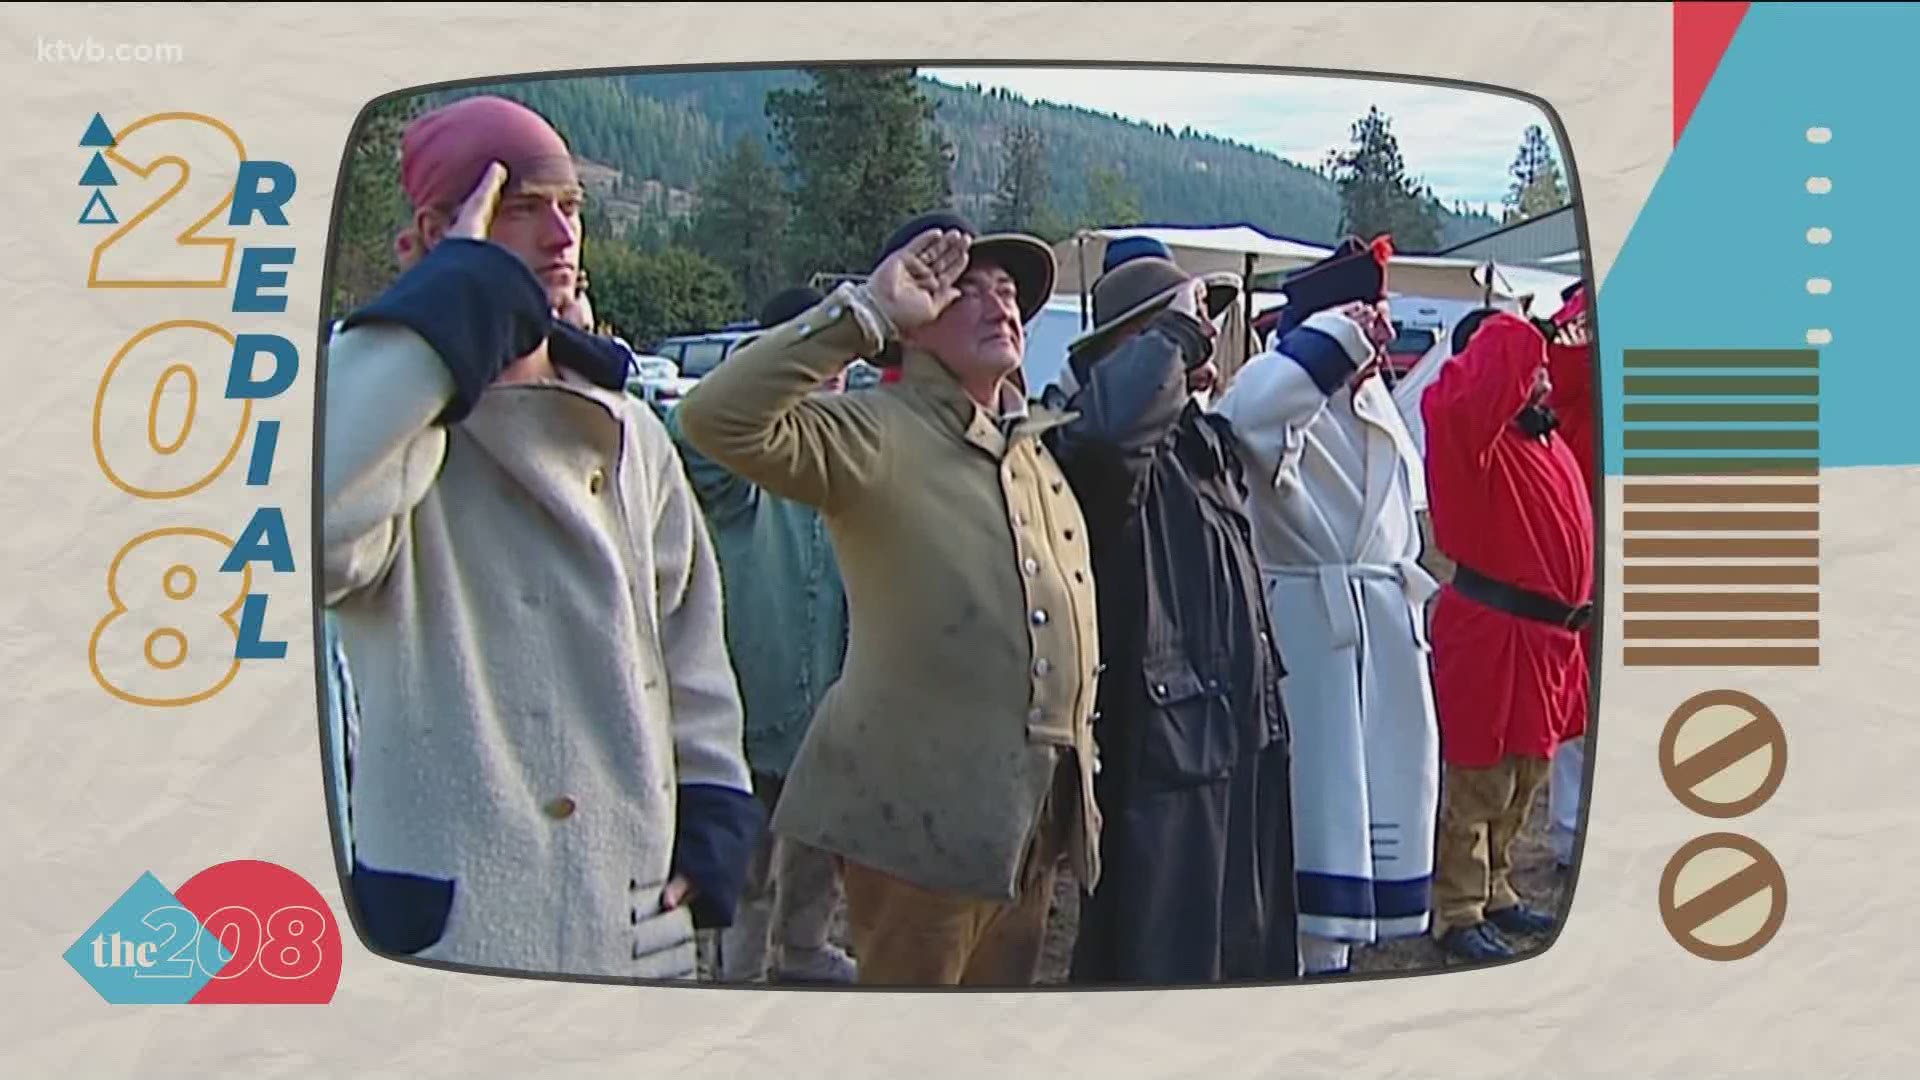 It was 215 years ago that the Corps of Discovery first set foot in what is now Idaho. On the 200th anniversary, a group of reenactors paid tribute.